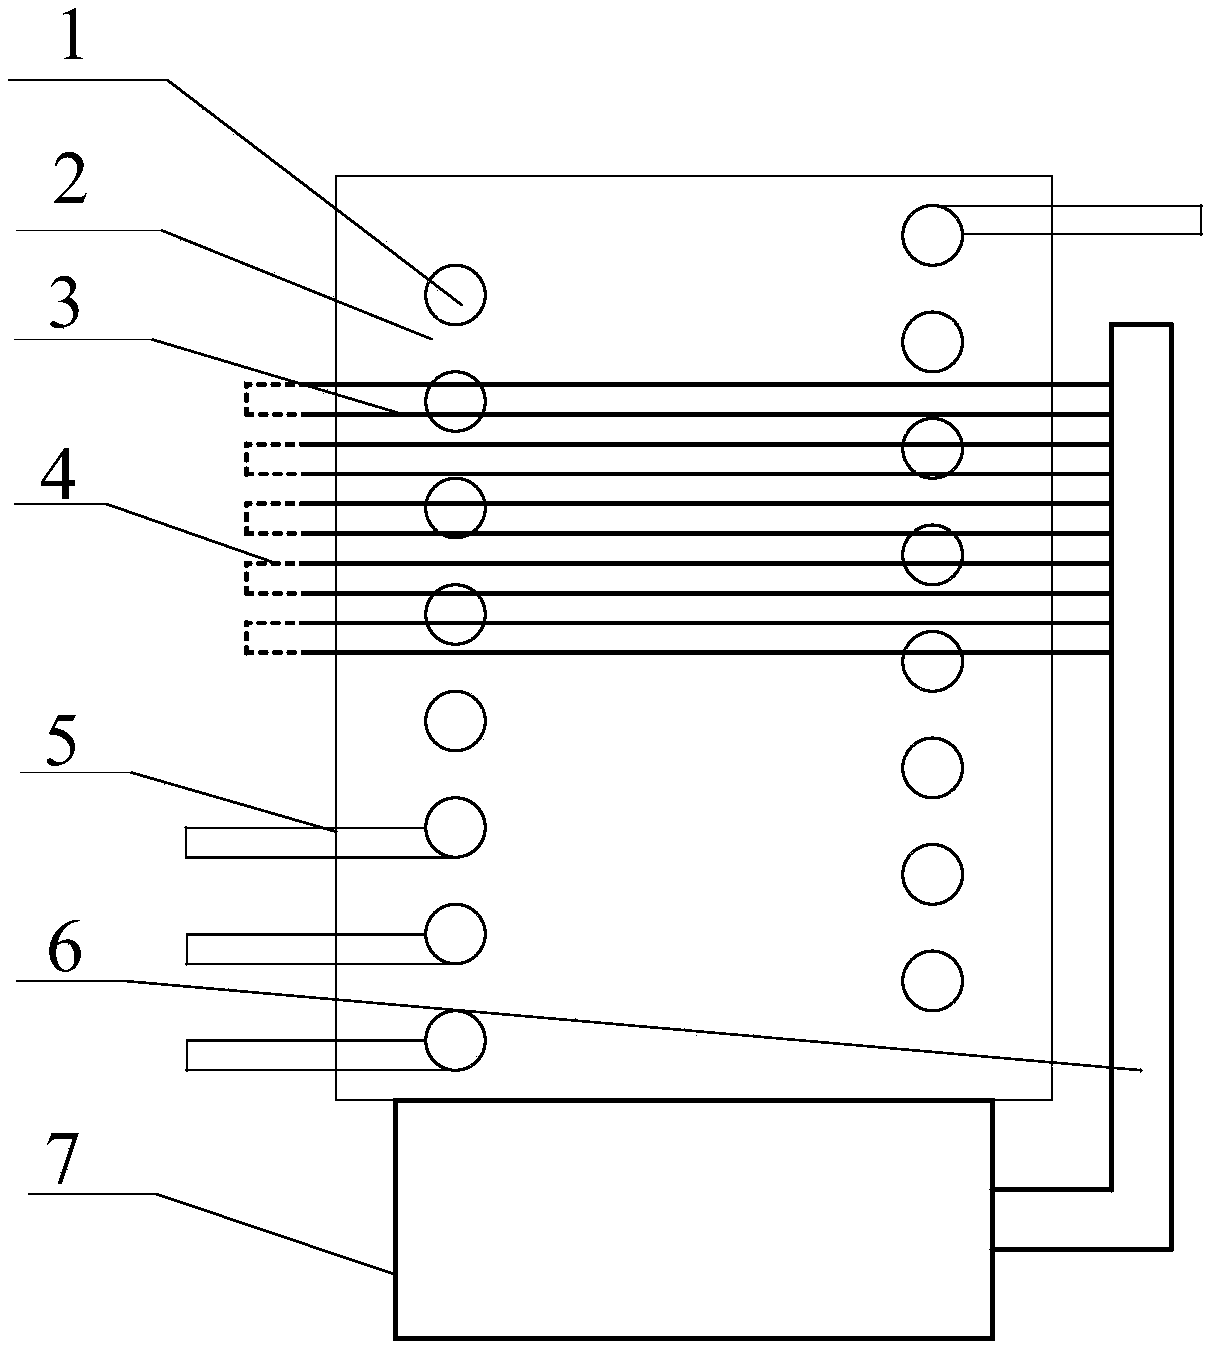 An inductor for current formation in a high-voltage impulse circuit